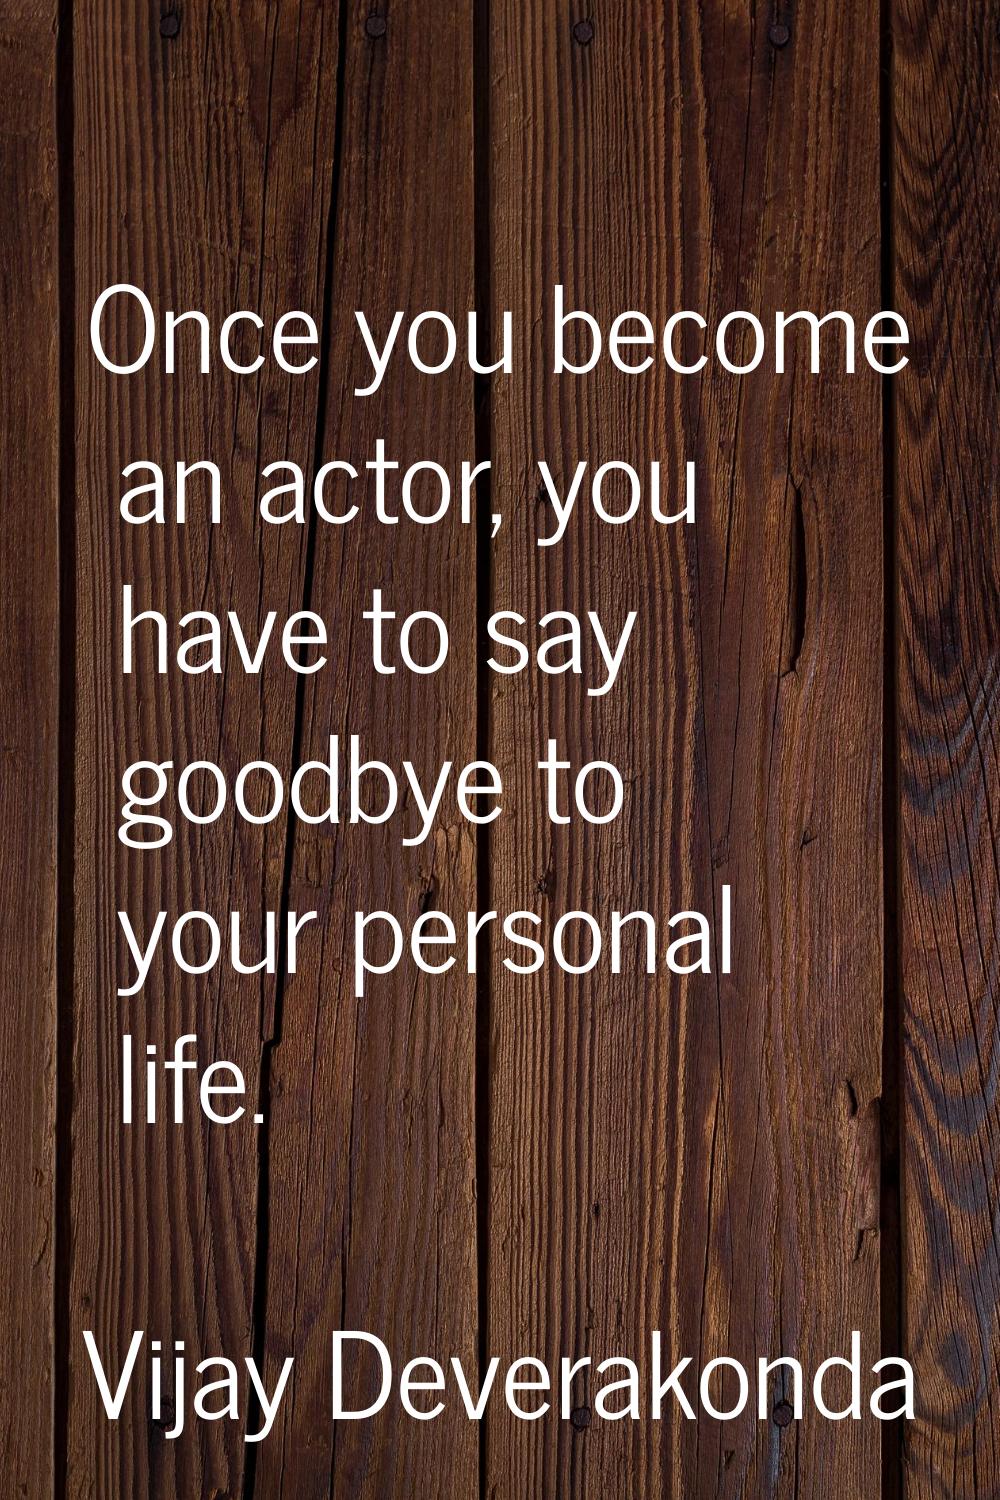 Once you become an actor, you have to say goodbye to your personal life.